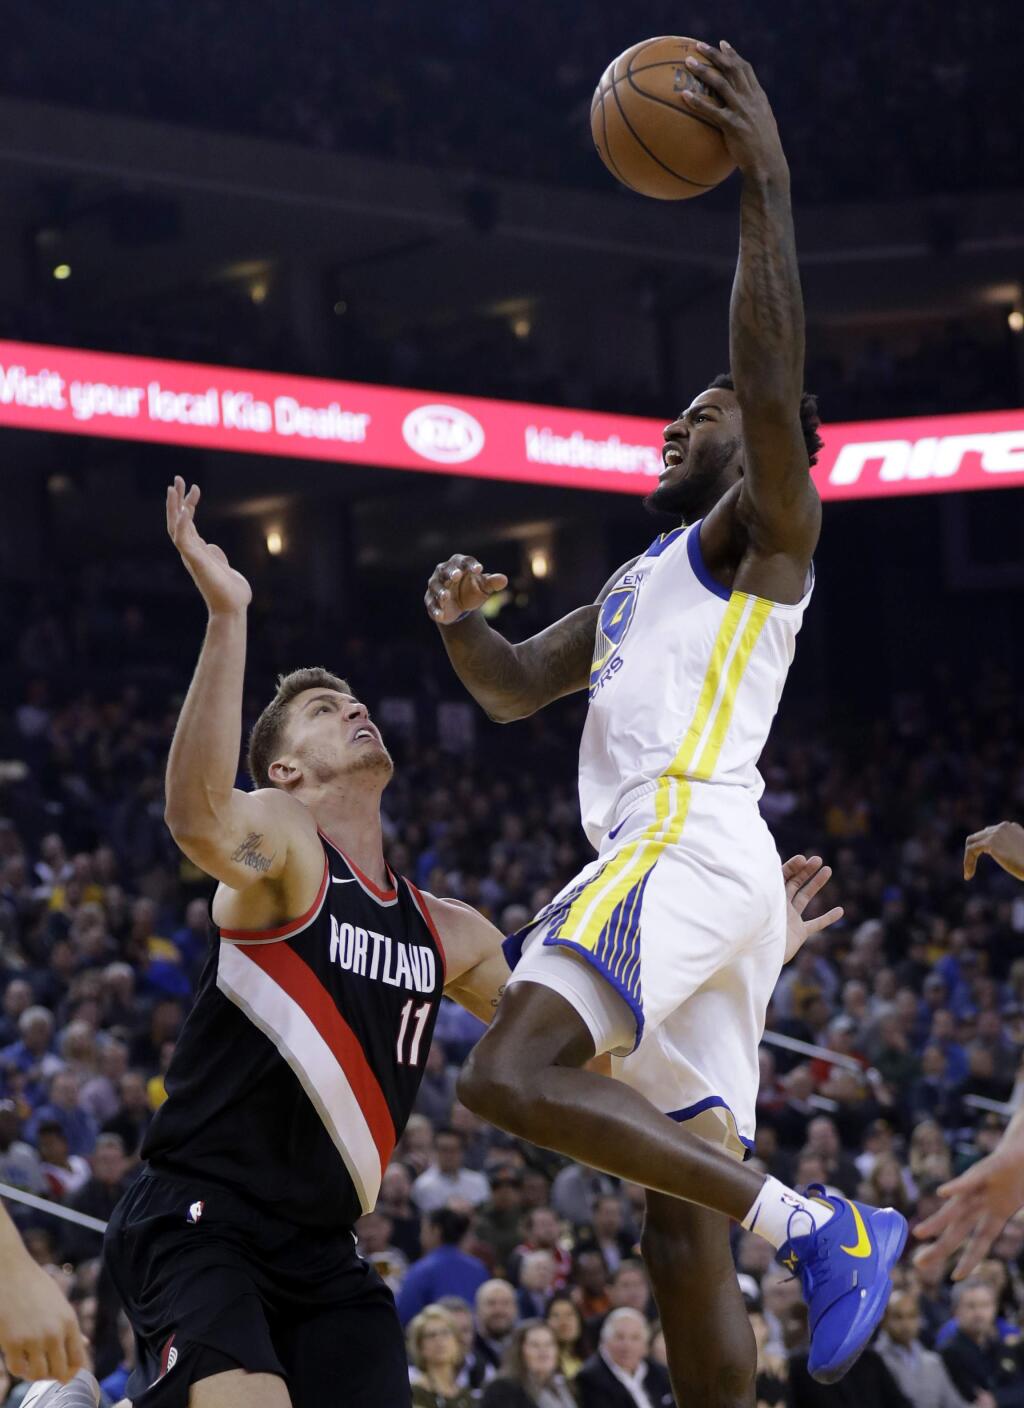 Golden State Warriors' Jordan Bell, right, drives to the basket as Portland Trail Blazers' Meyers Leonard (11) defends during the first half of an NBA basketball game Monday, Dec. 11, 2017, in Oakland, Calif. (AP Photo/Marcio Jose Sanchez)